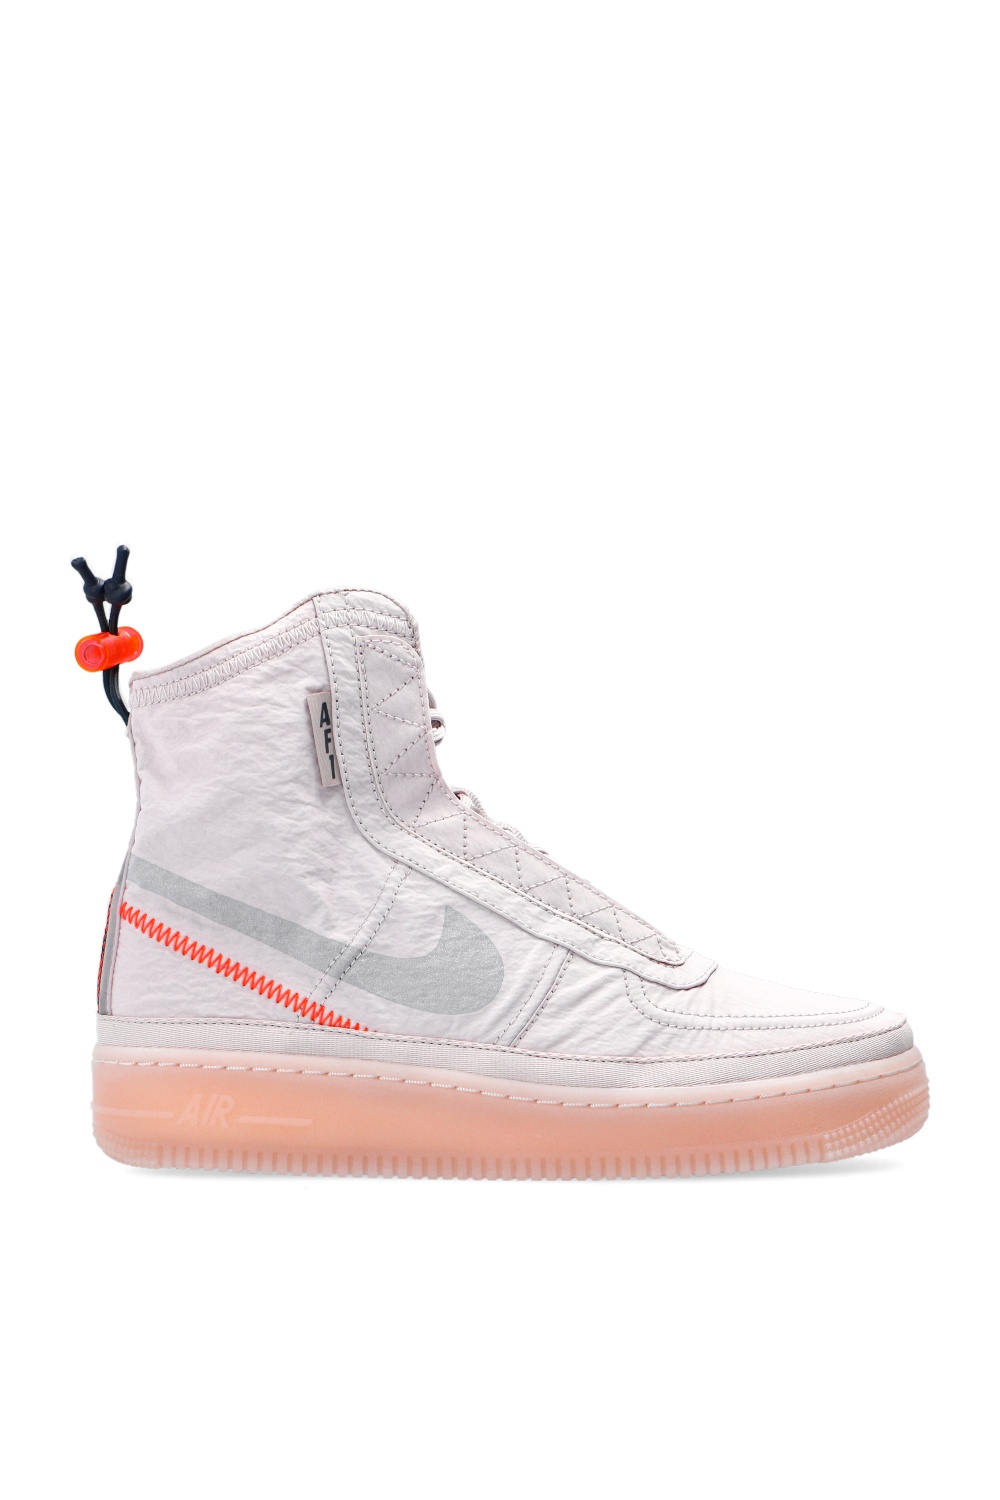 air force 1 shell sneaker boot